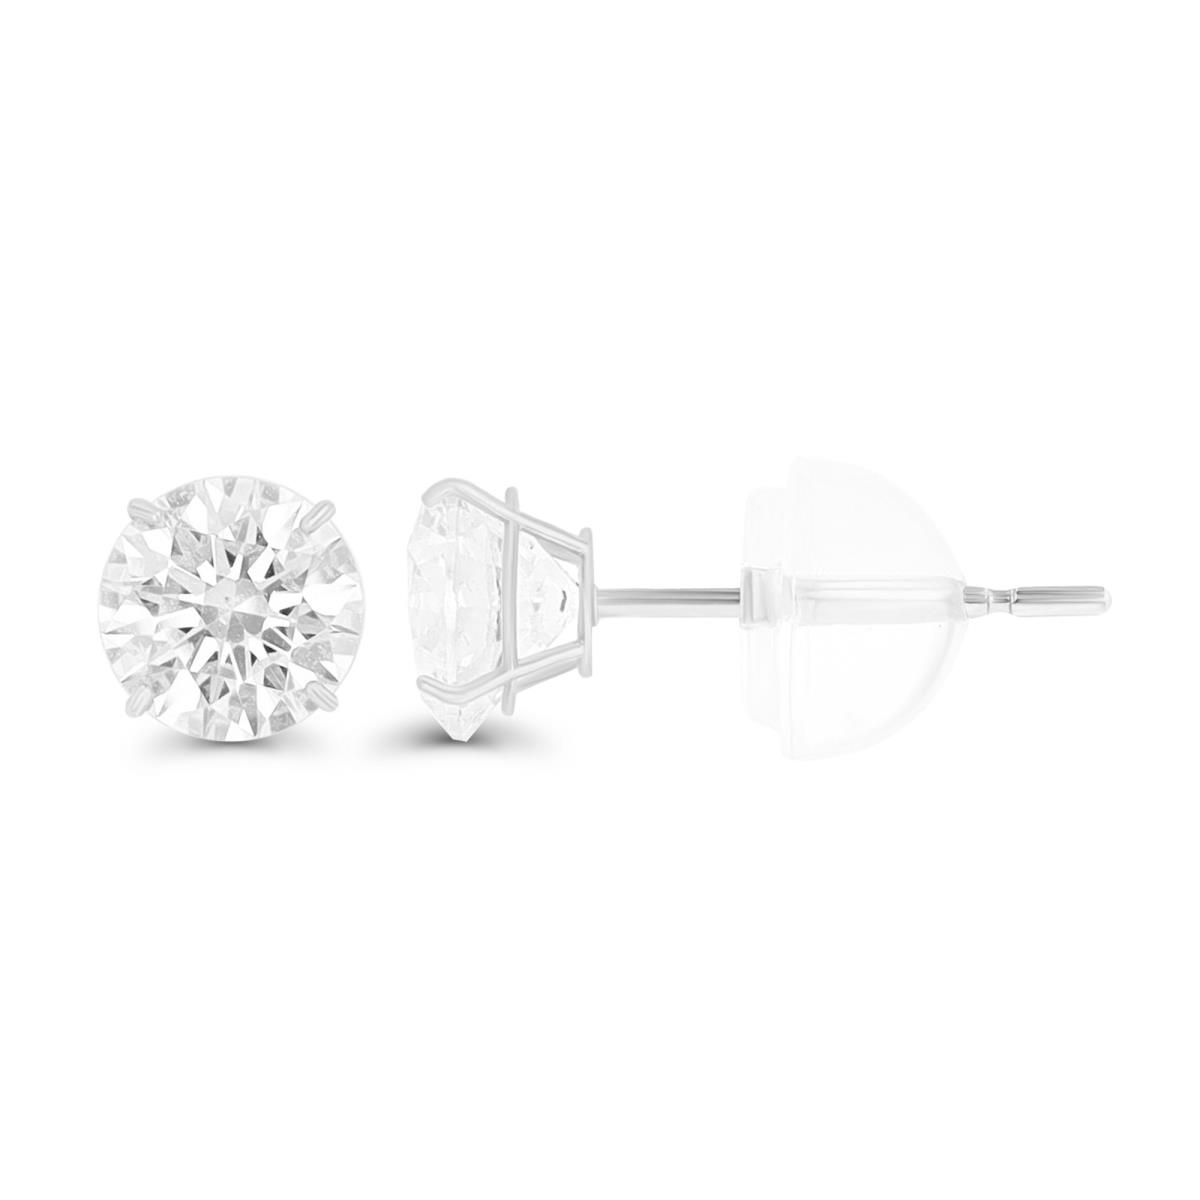 14K White Gold 5mm Rd White Swarovski Zirconia 4-Prong Cast Basket Solitaire Earring & Silicone Bubble Back